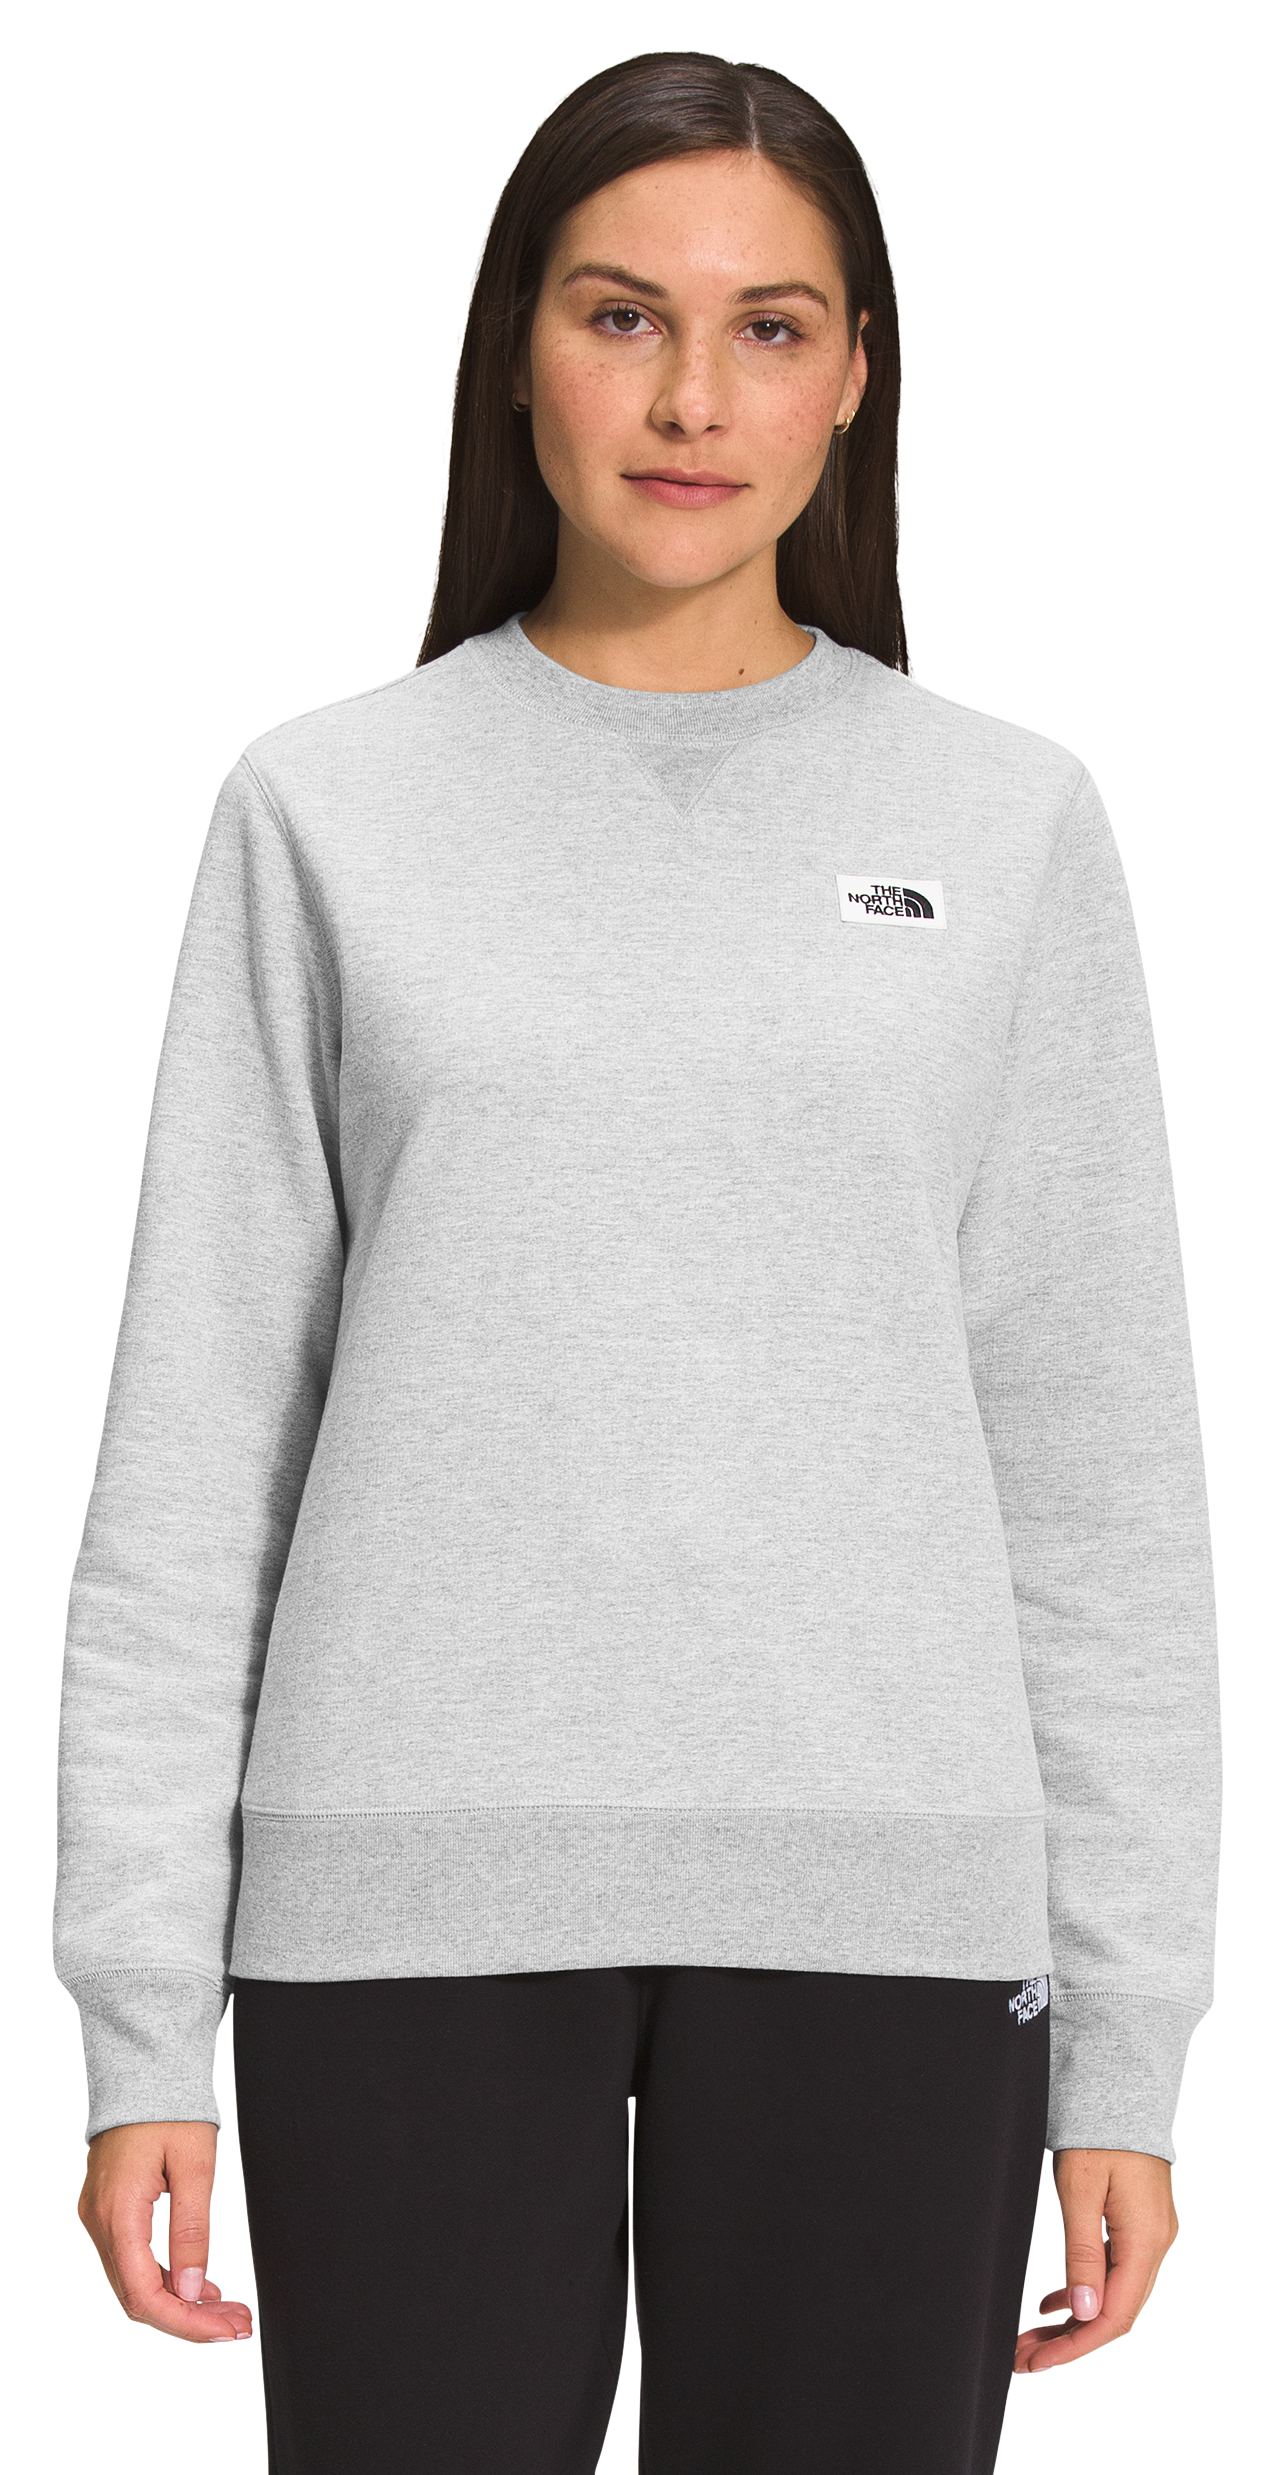 The North Face Heritage Patch Crew-Neck Long-Sleeve Sweatshirt for